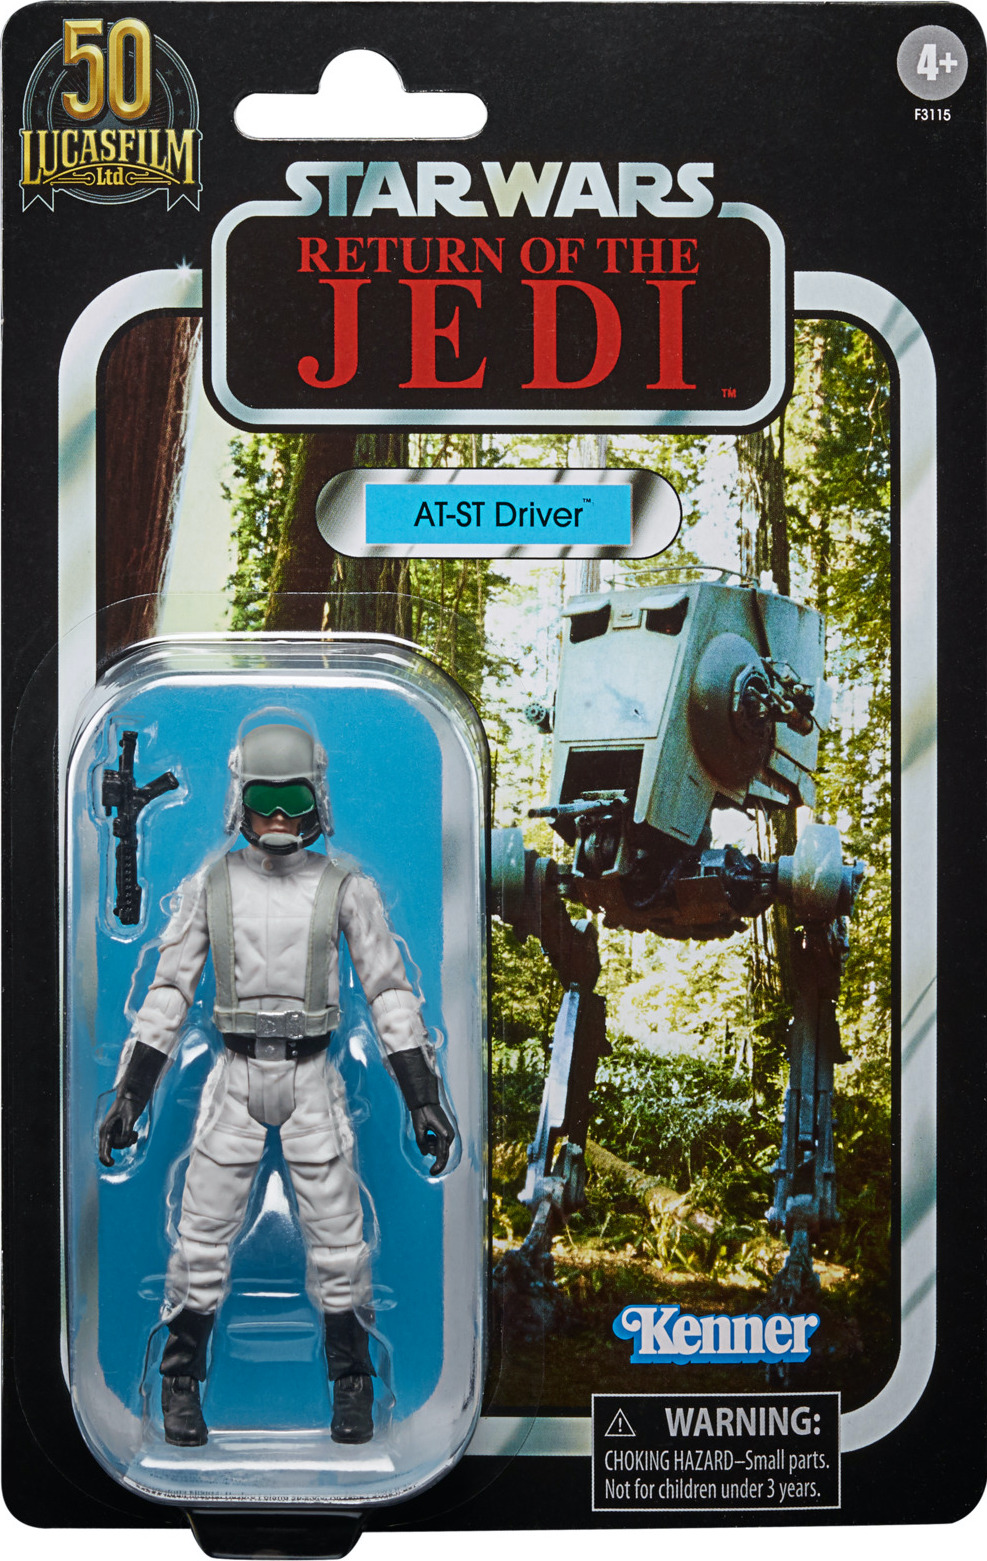 STAR WARS the Black Series IMPERIAL AT-ST DRIVER 3.75" rotj walmart exclusive 